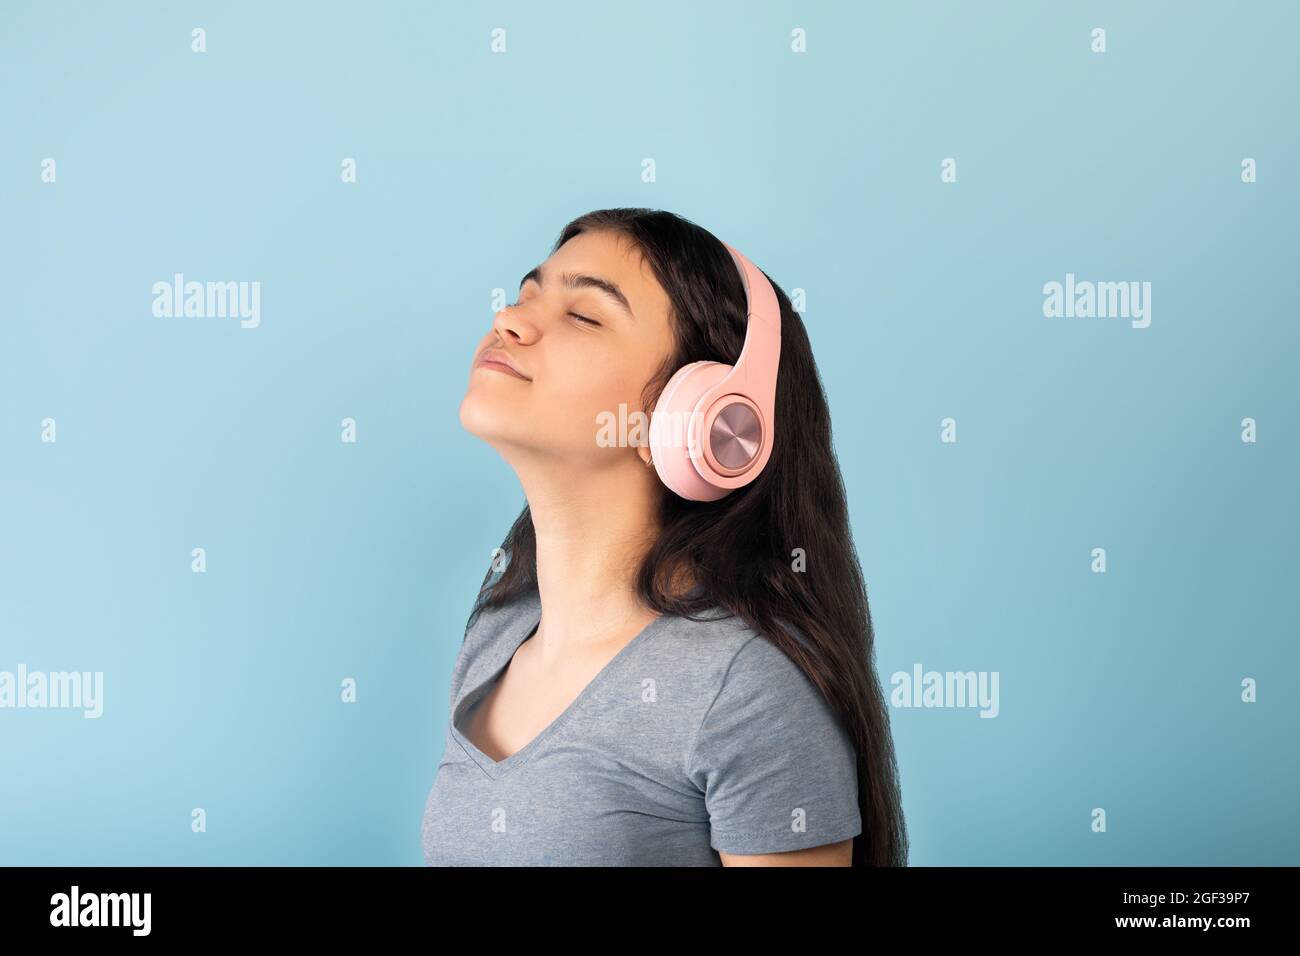 Attractive Indian teen girl enjoying her new stereo headset, listening to music with closed eyes over blue background Stock Photo